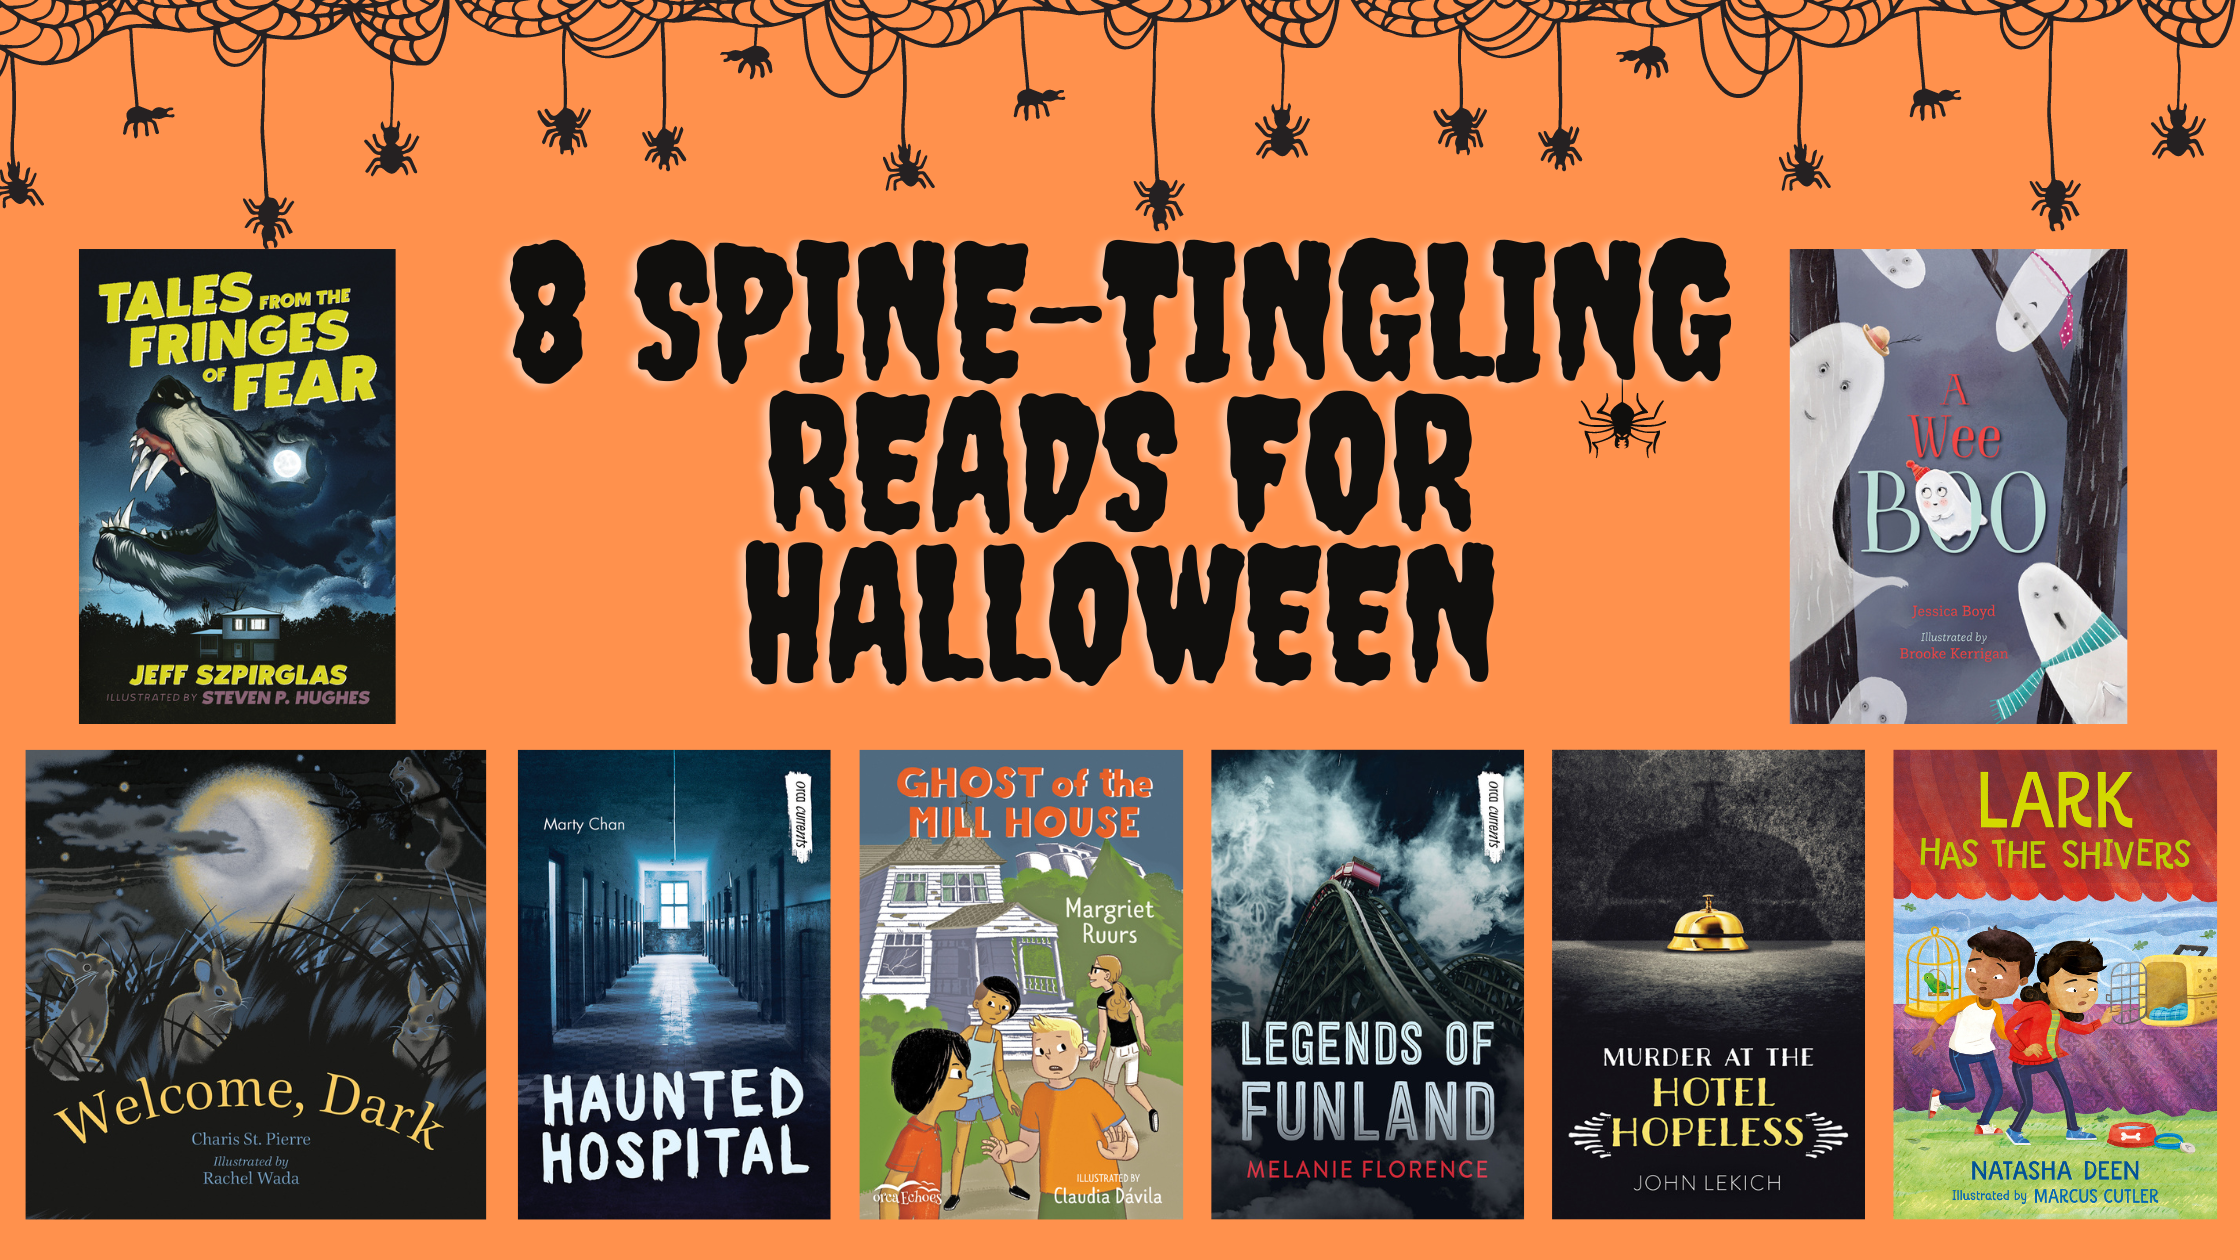 8 spine-tingling reads for Halloween